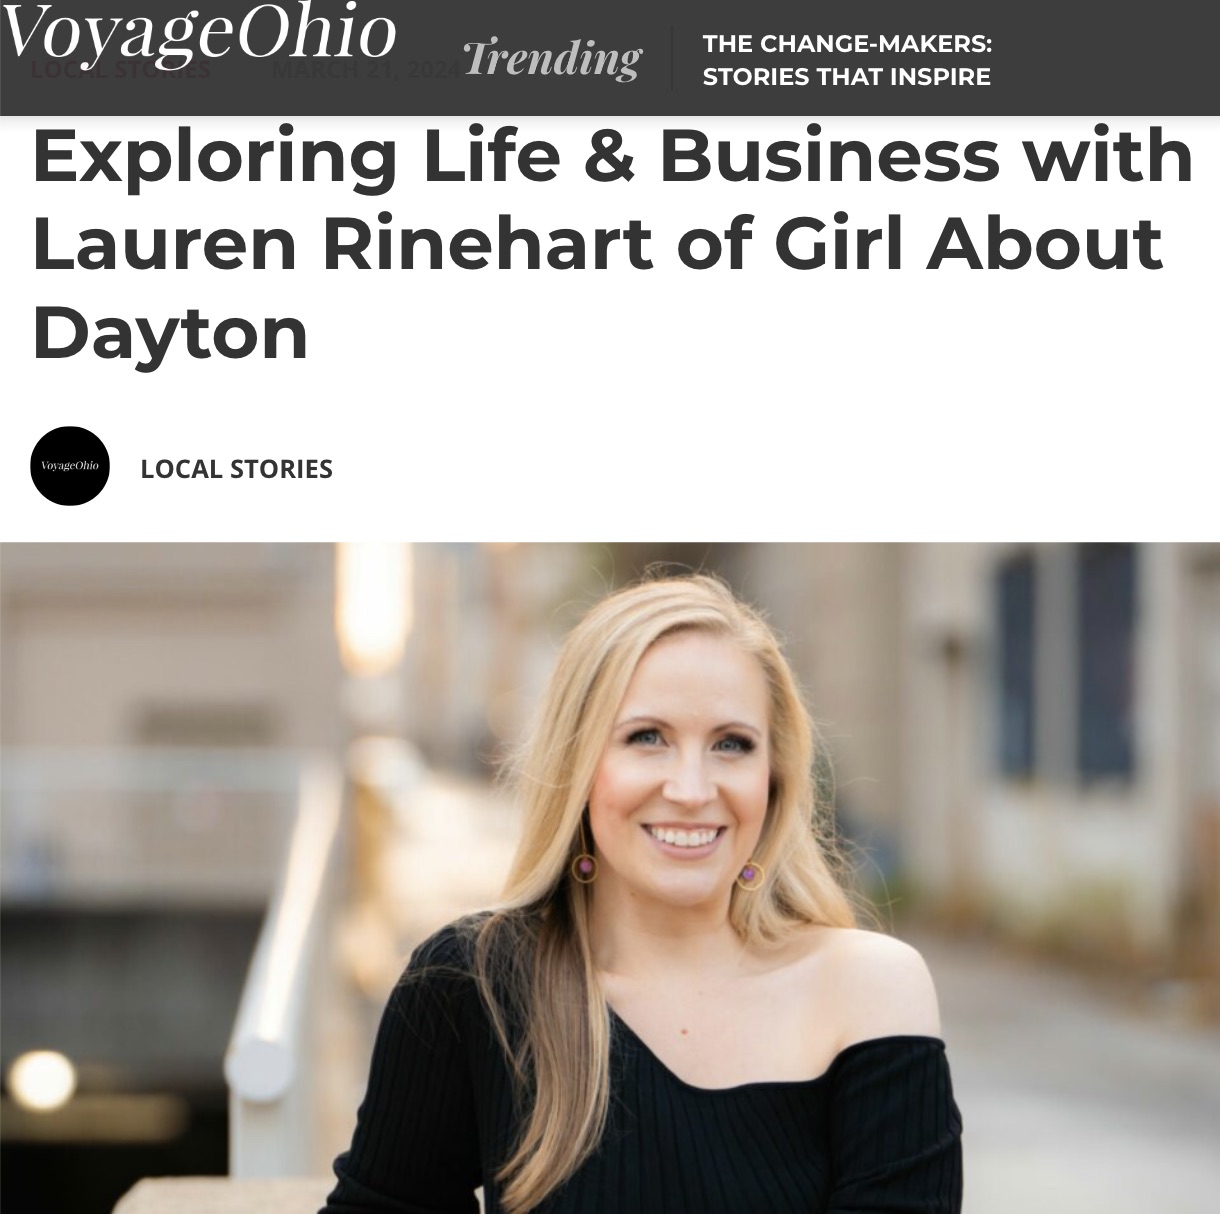 Girl About Dayton in the press